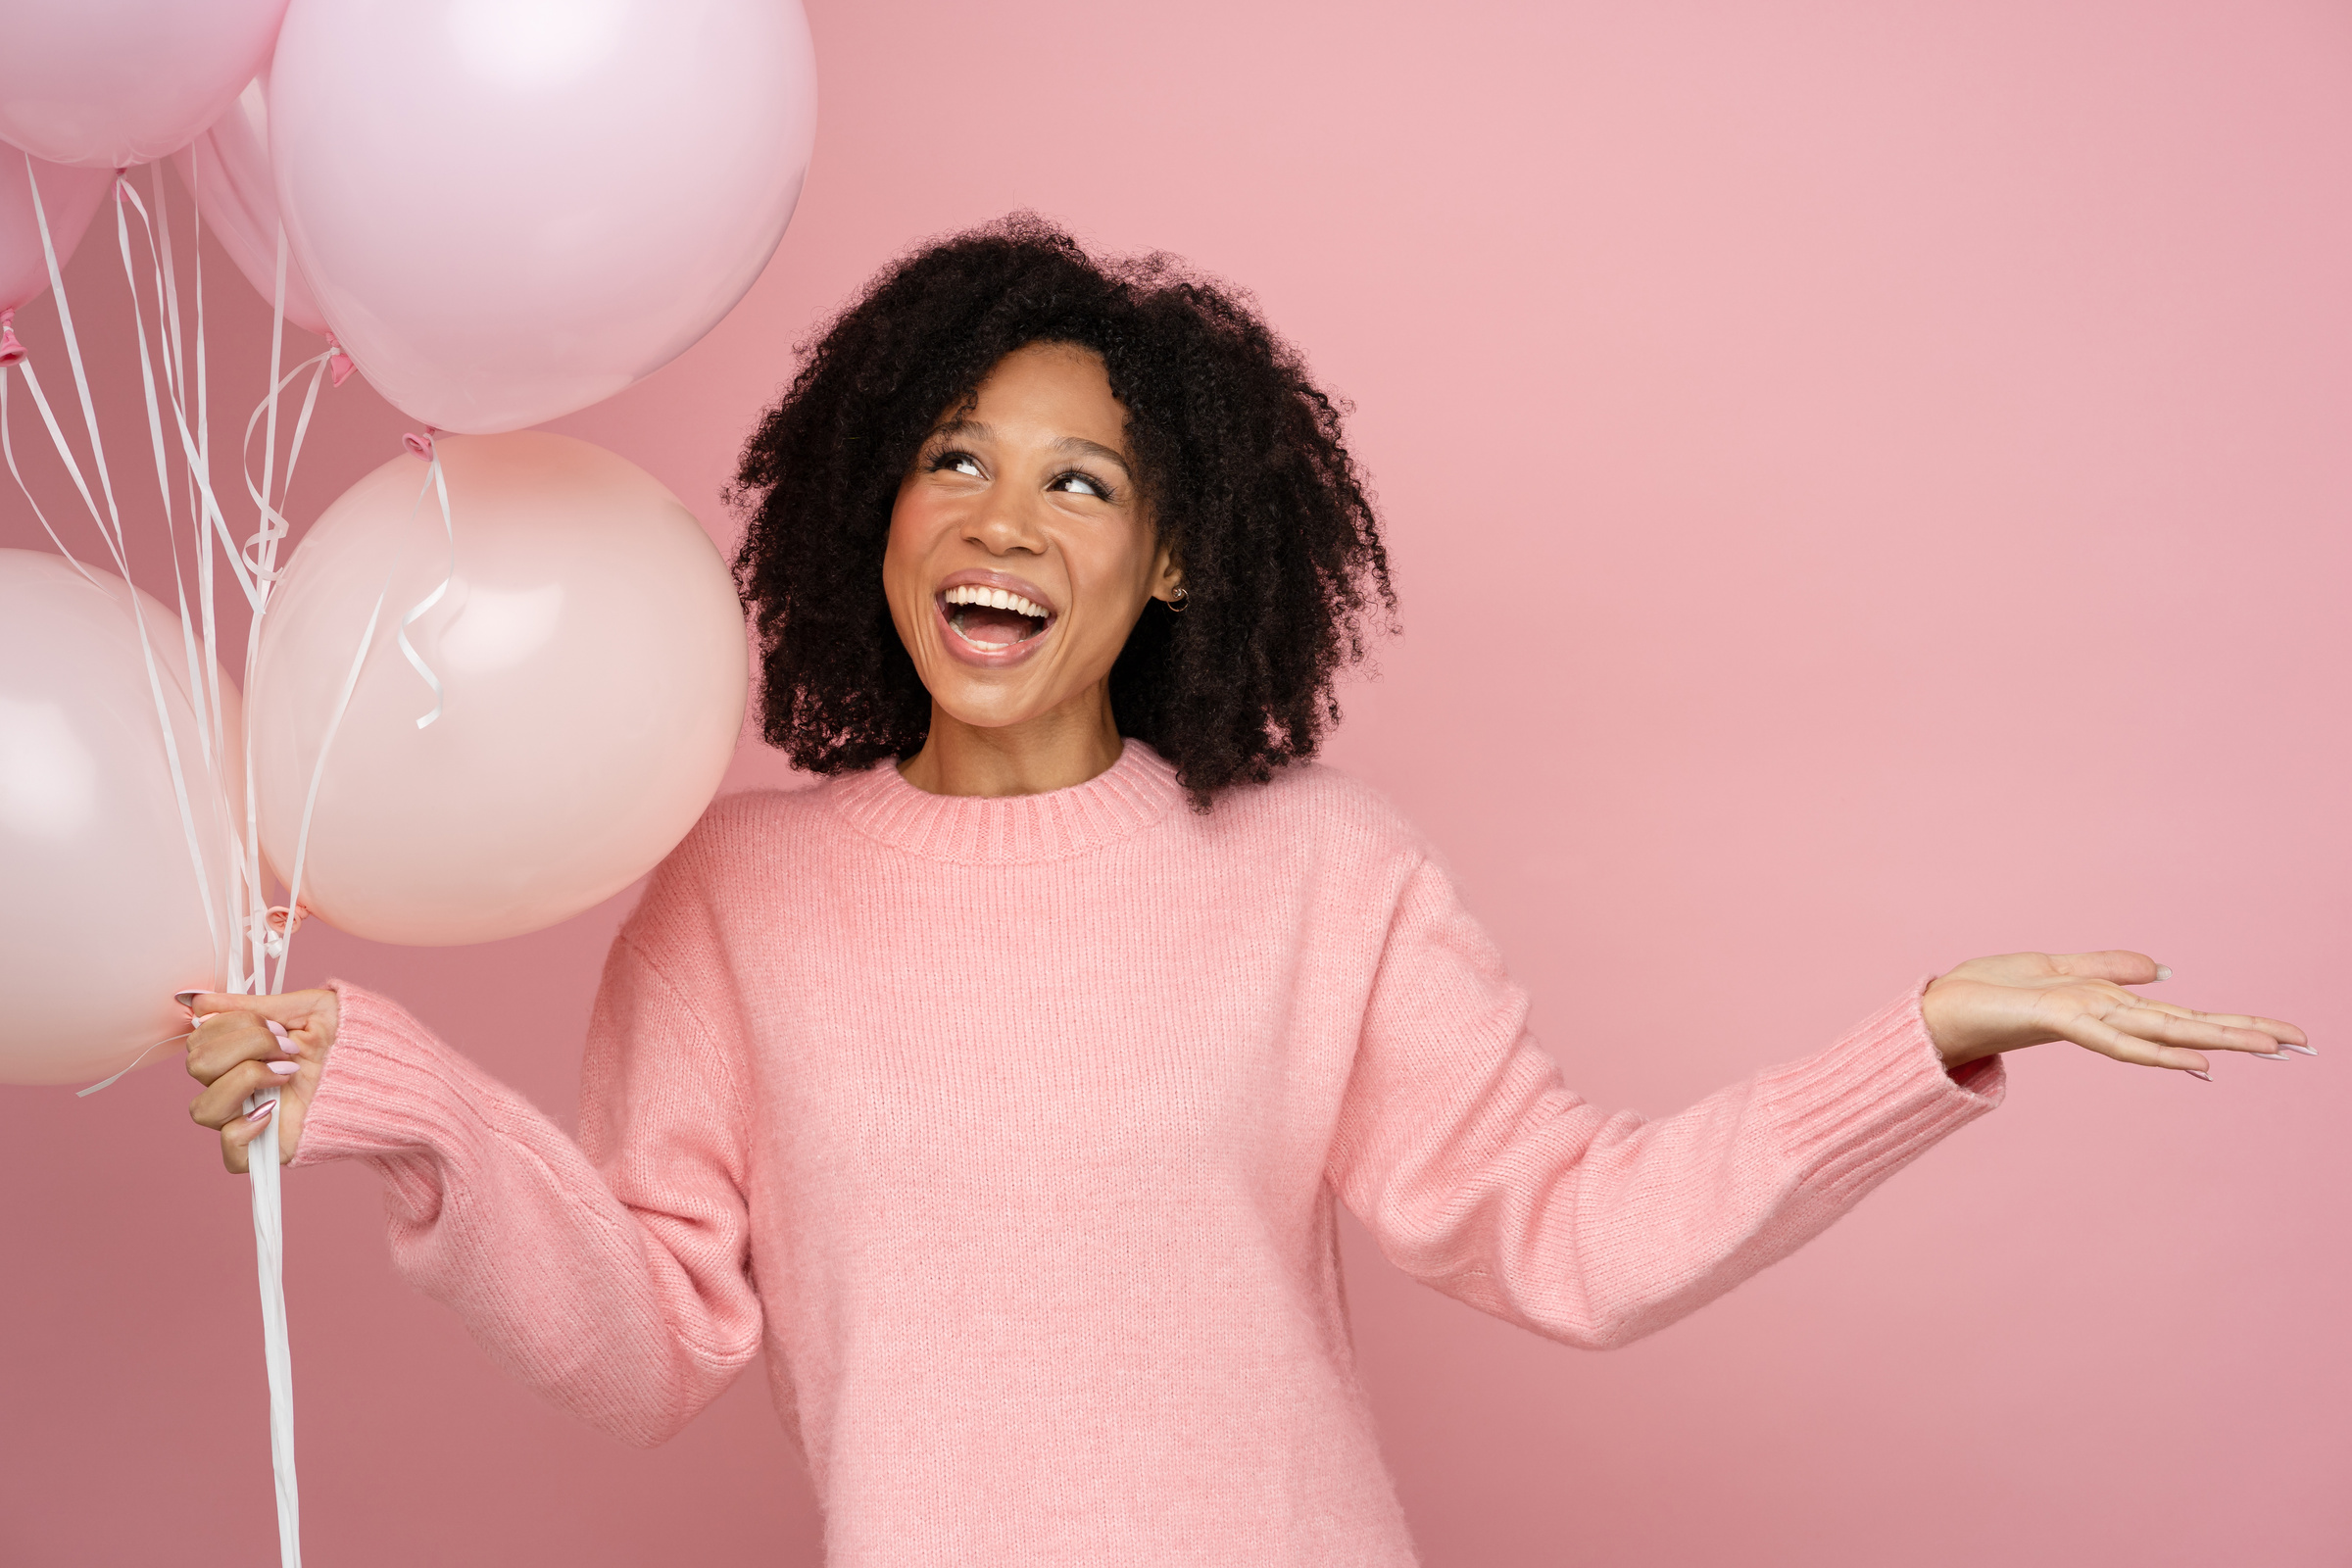 Portrait of a Happy Woman Holding Pastel Pink Balloons 